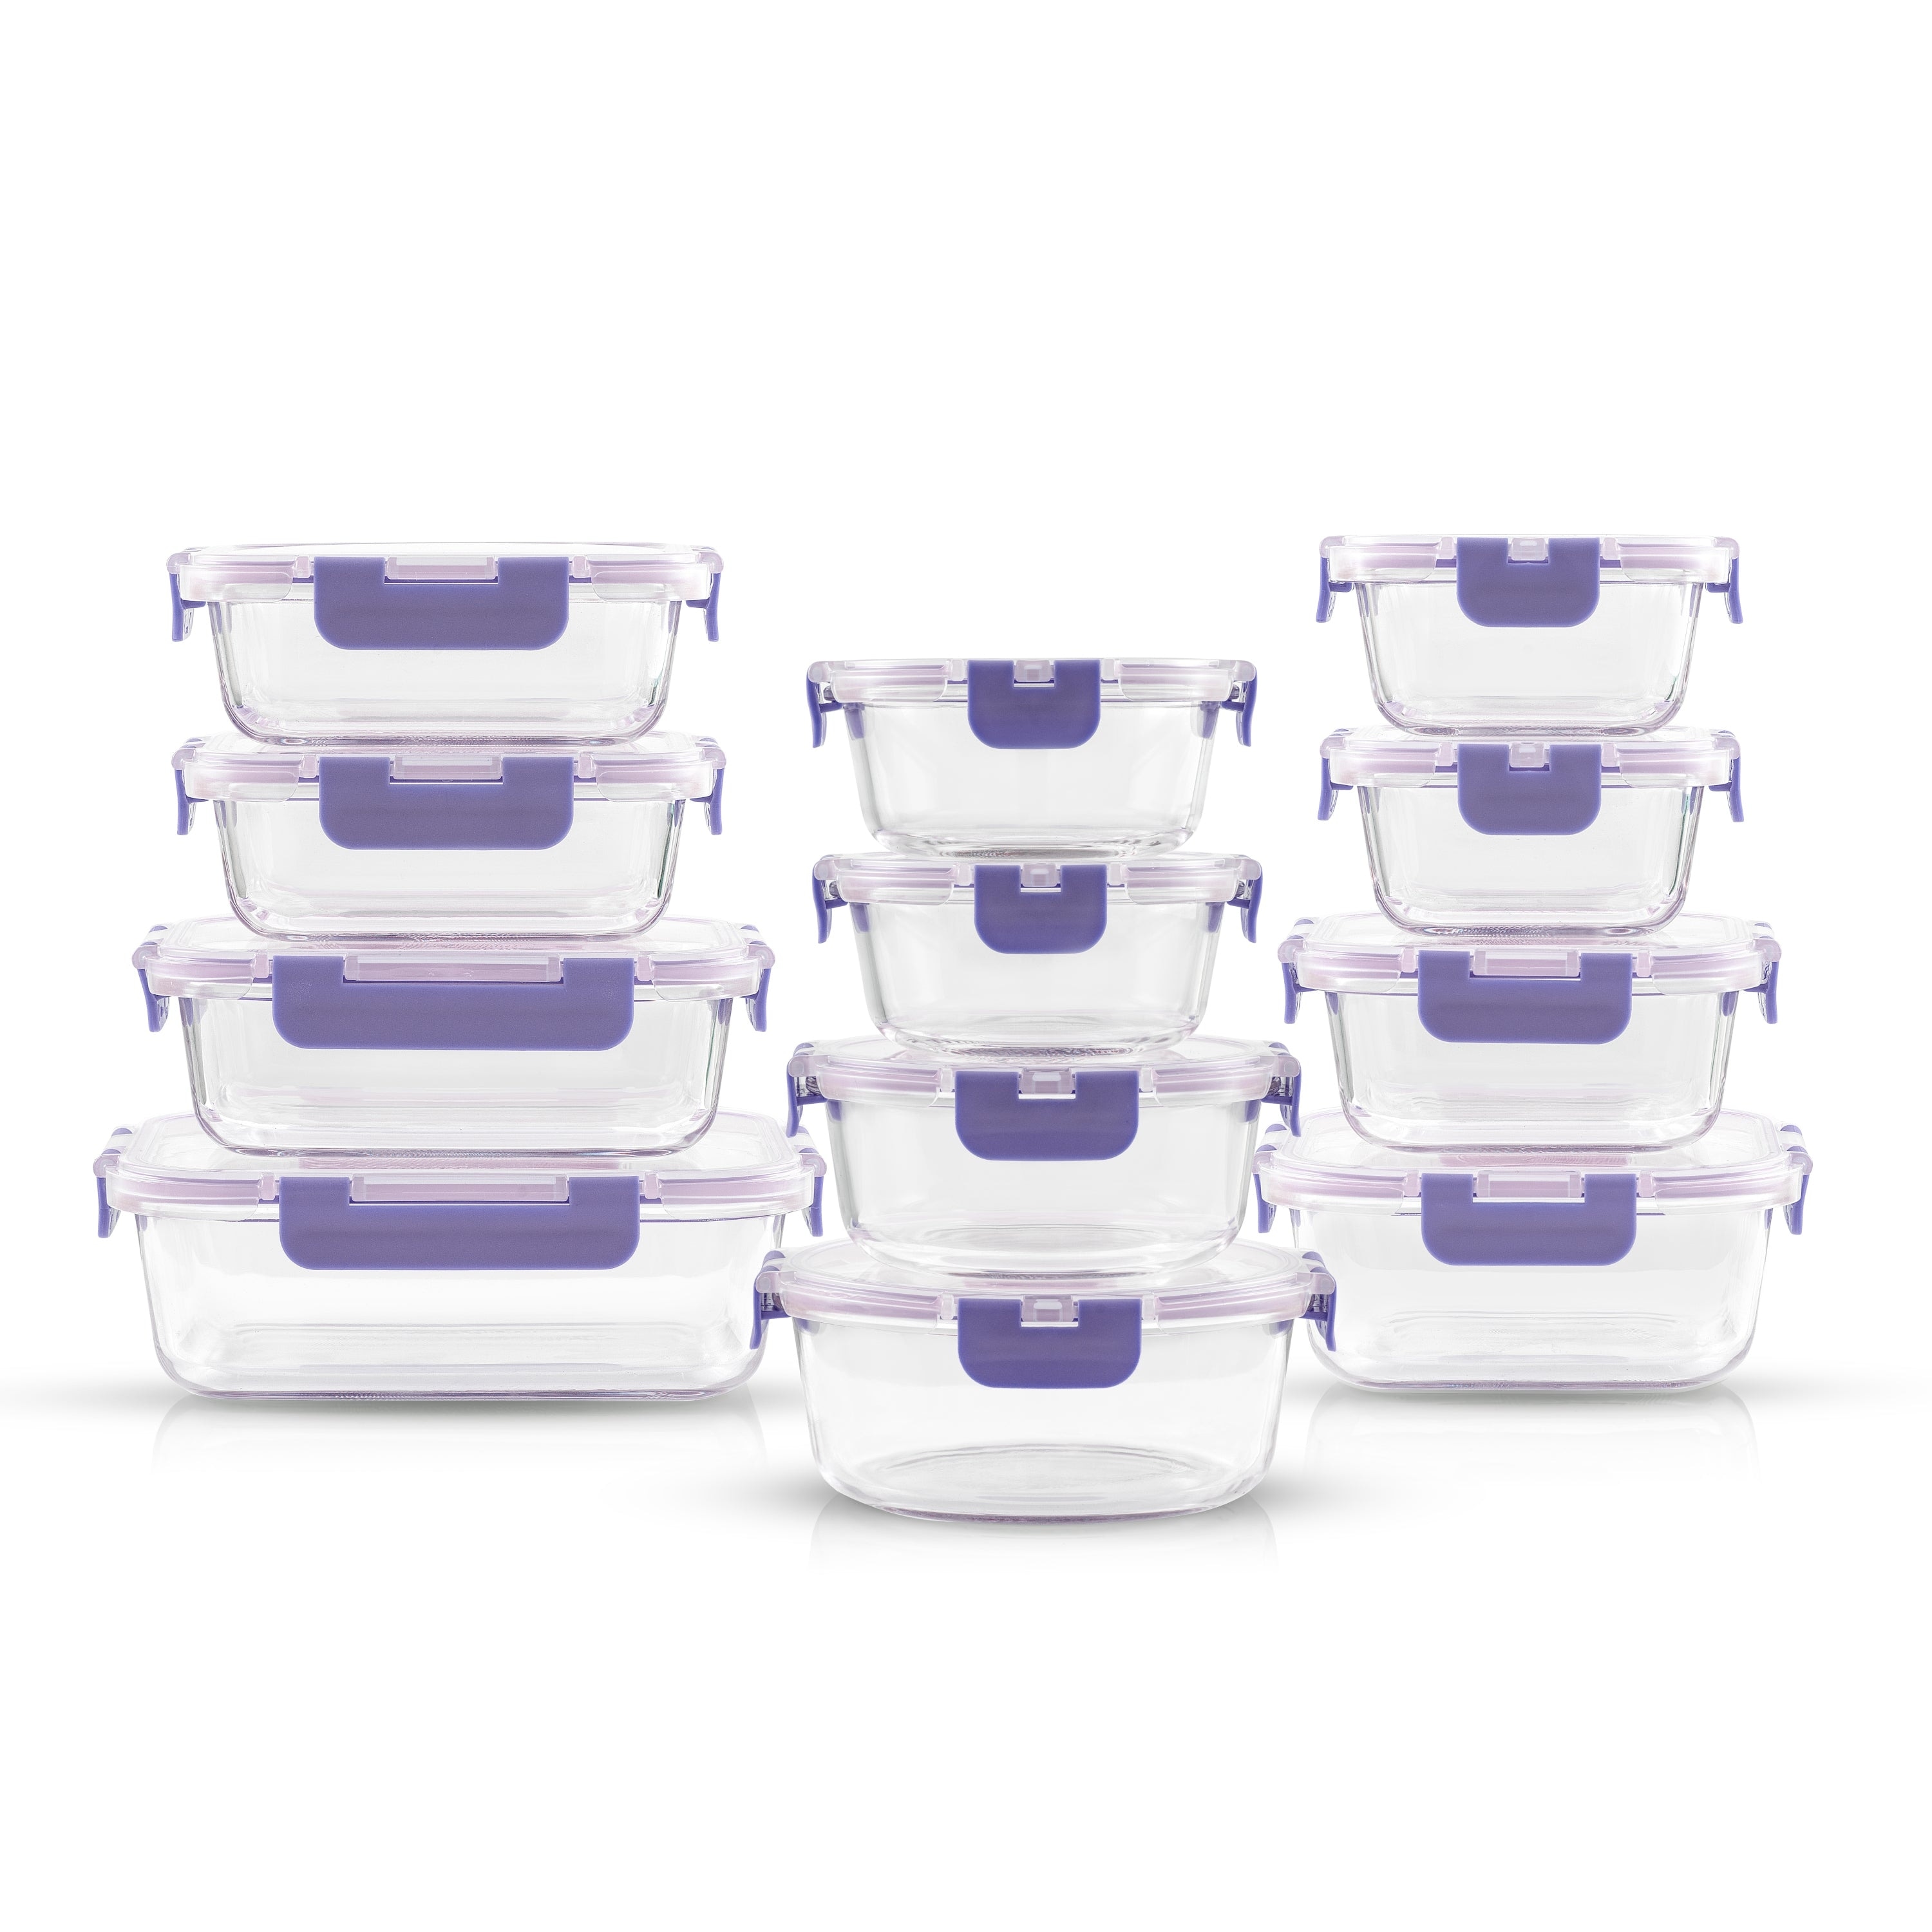 JoyFul 24 Piece Glass Food Storage Containers Set with Airtight Lids, Bed  Bath & Beyond deals this week, Bed Bath & Beyond flyer